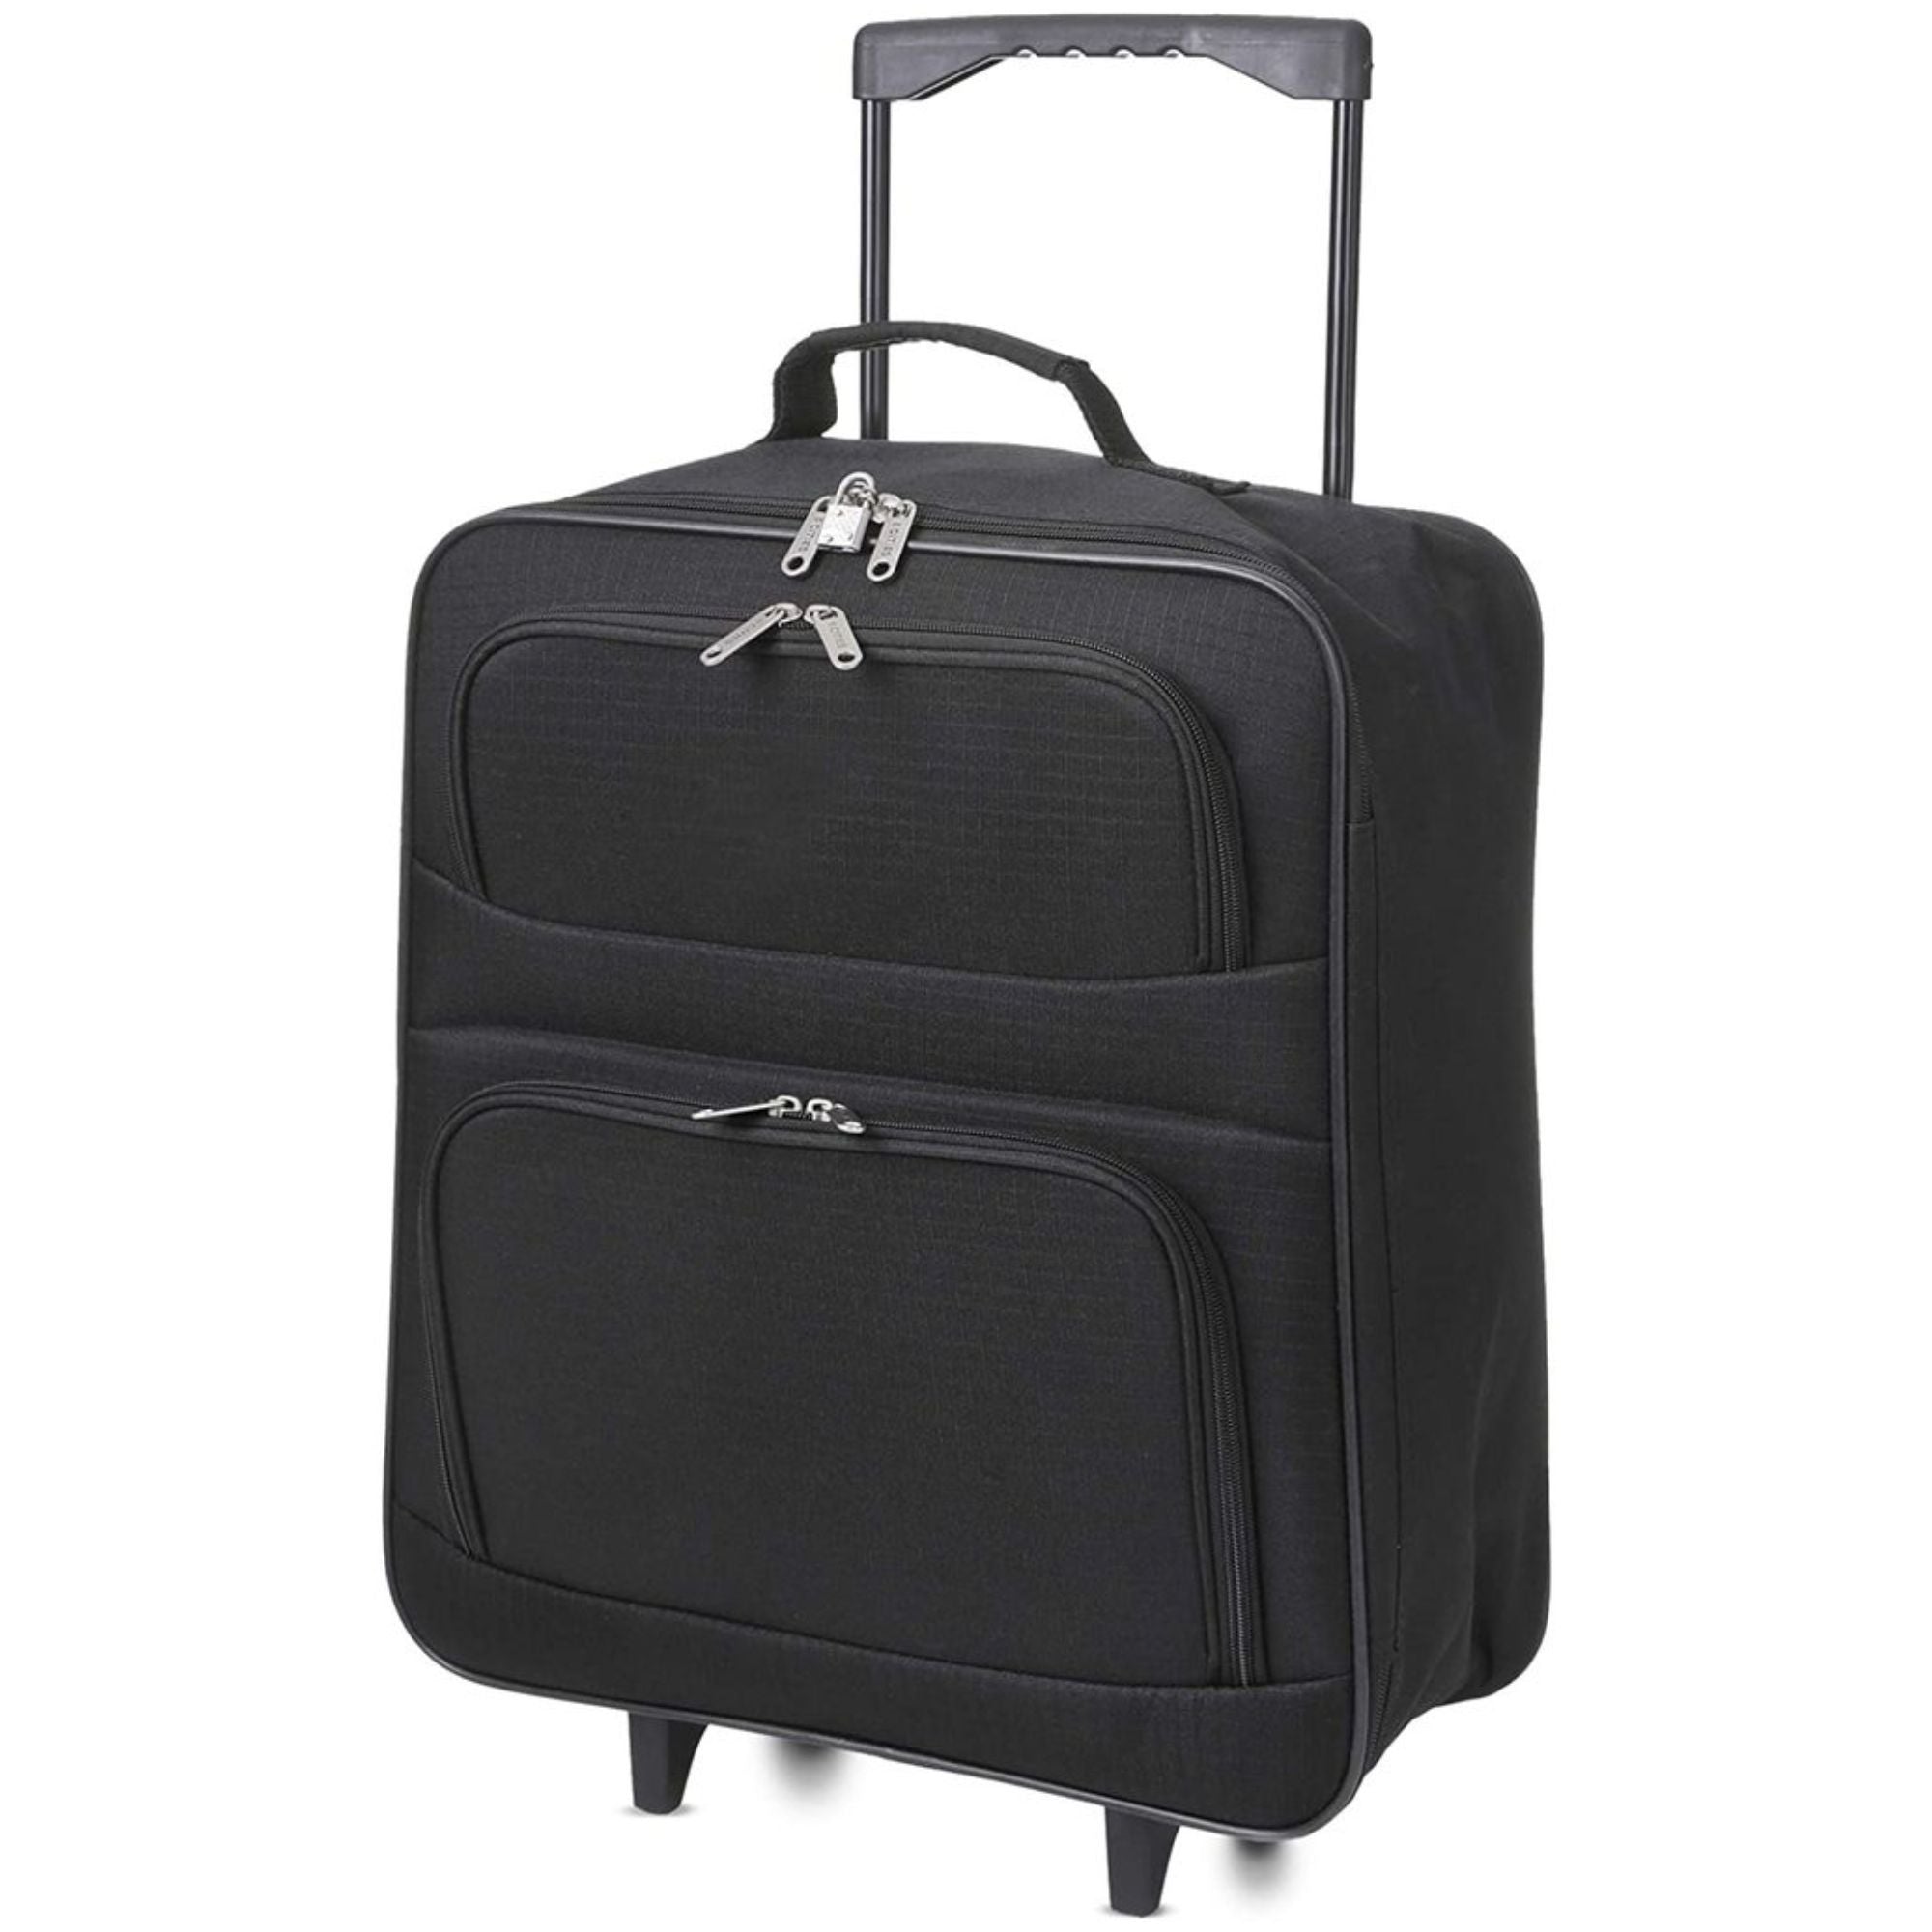 Ryanair travel bag 40x25x20 cm or 40x20x25 with multi compartments inside  and front travel suitcase with two extra front compartment size hand luggage  Vueling Easyjet CAB1-CAB2-CAB2-INVI